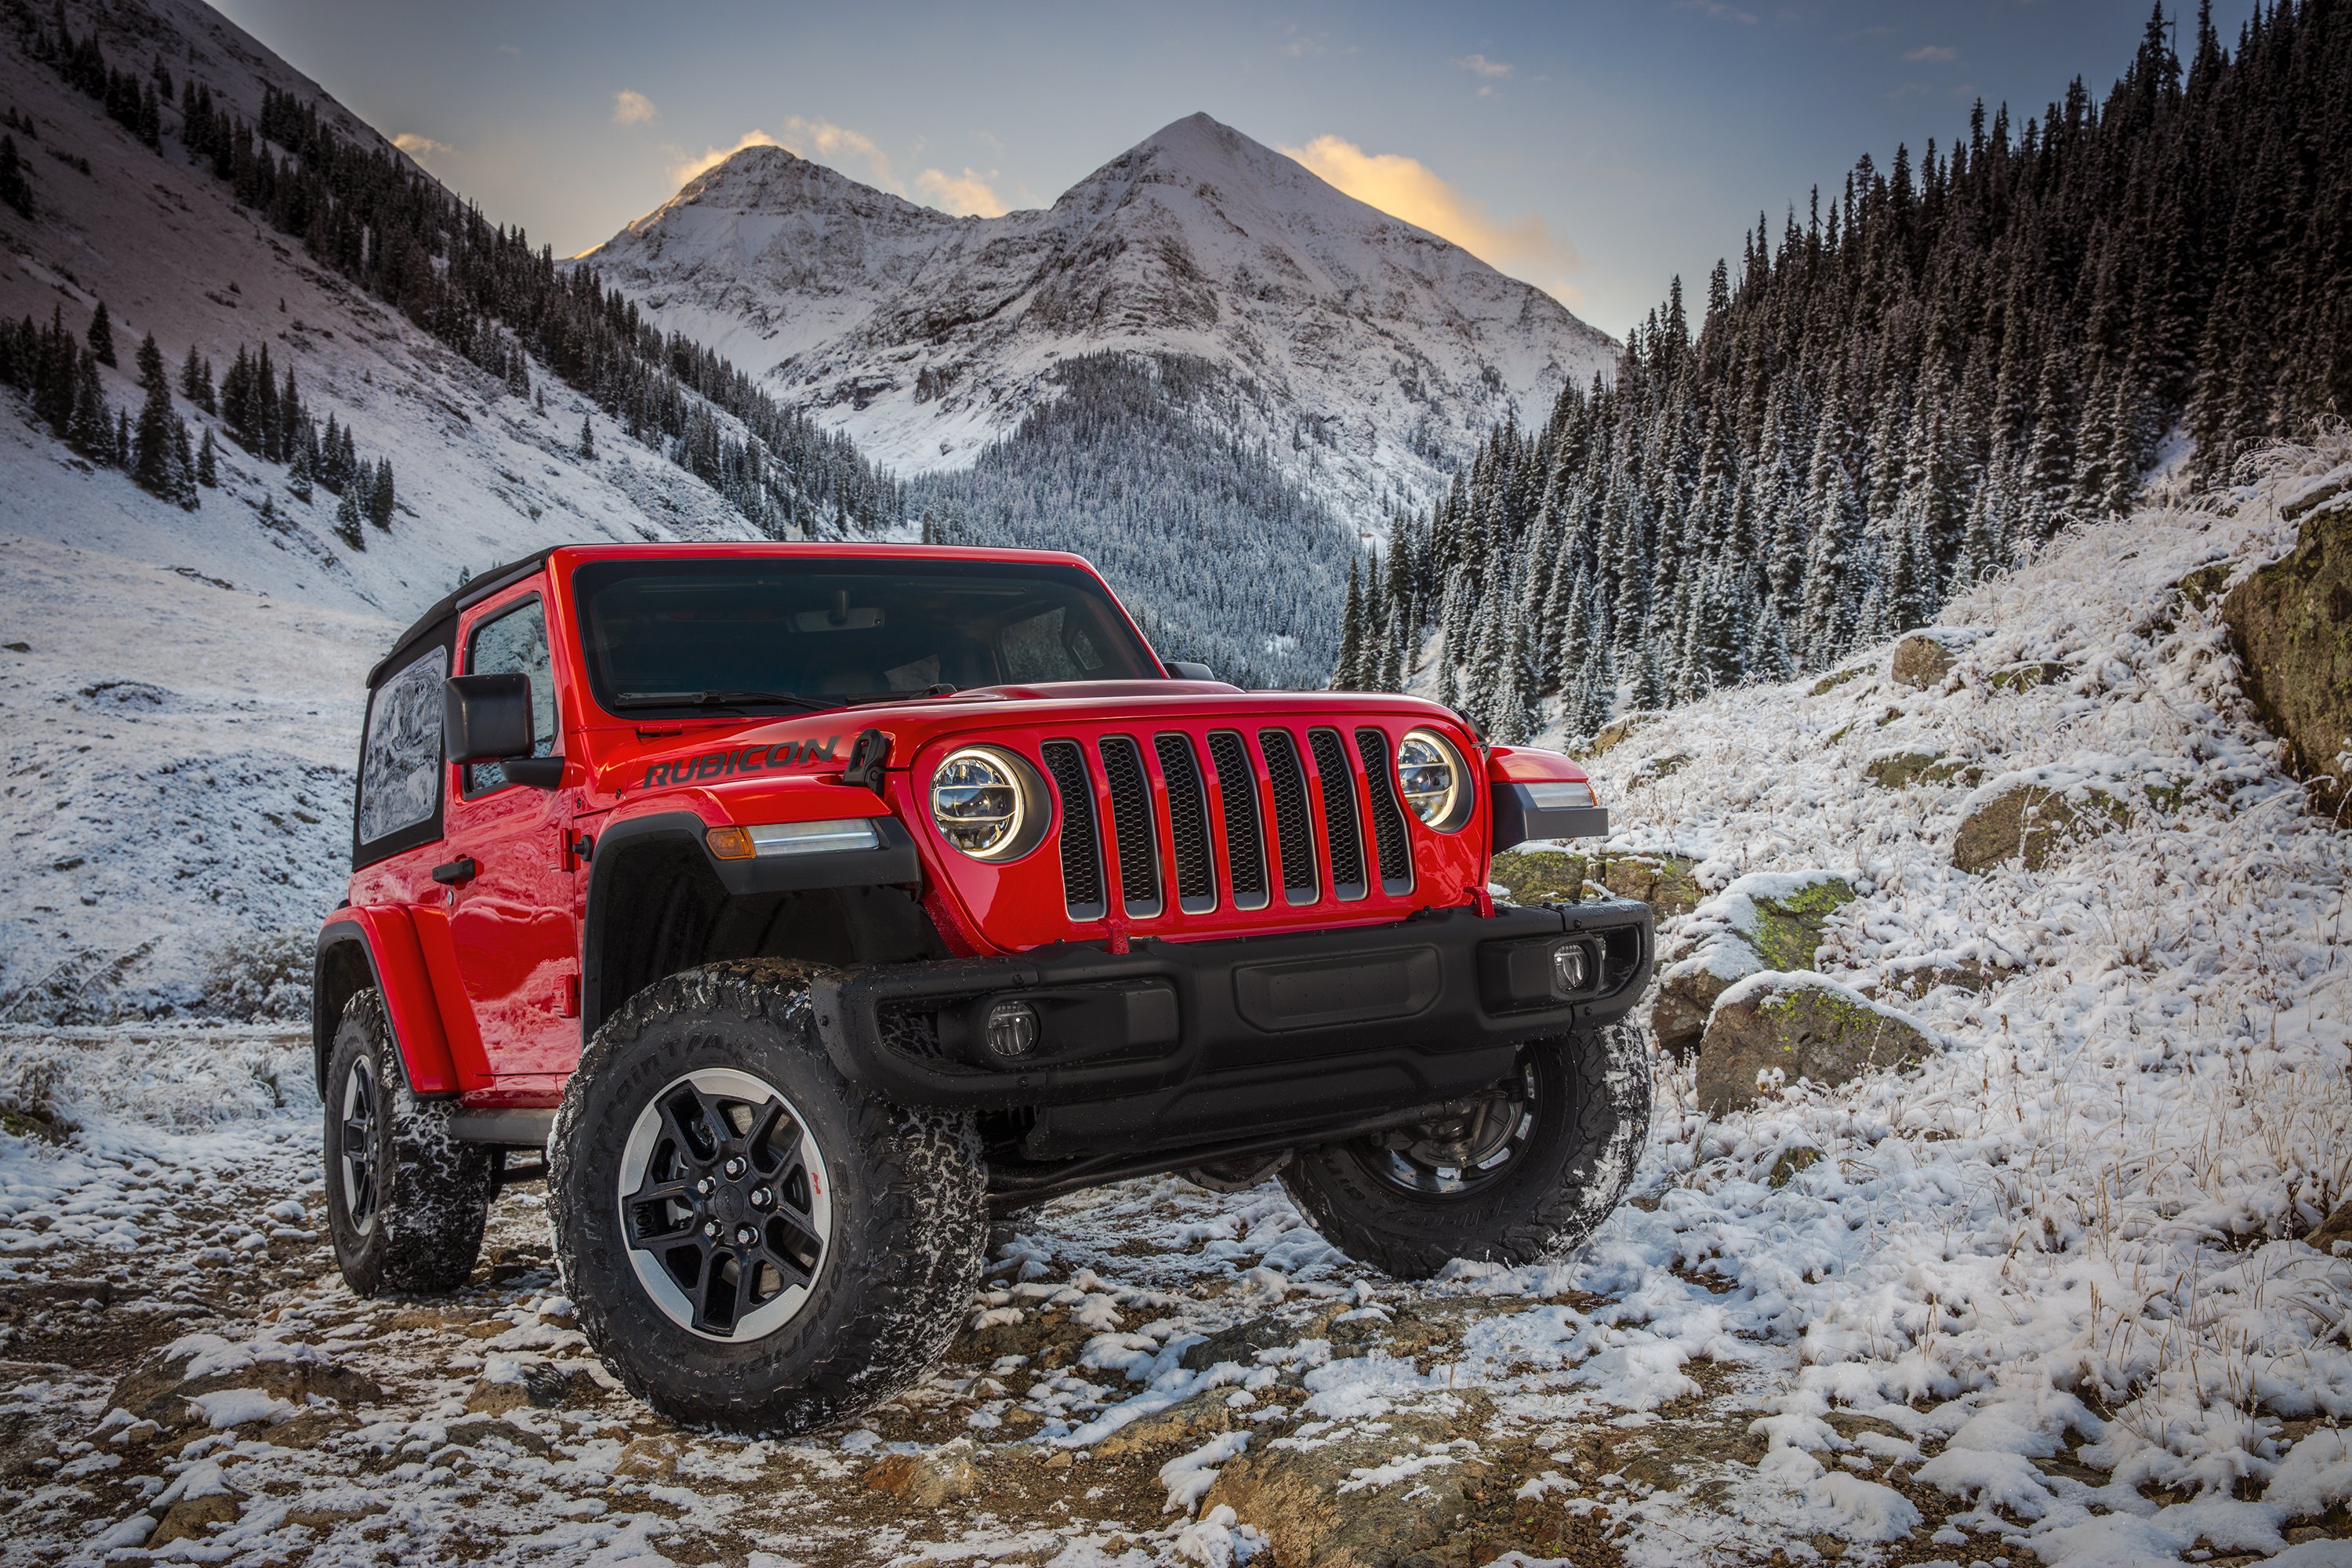 Jeep Finally Has a Fix for the Wrangler Death Wobble